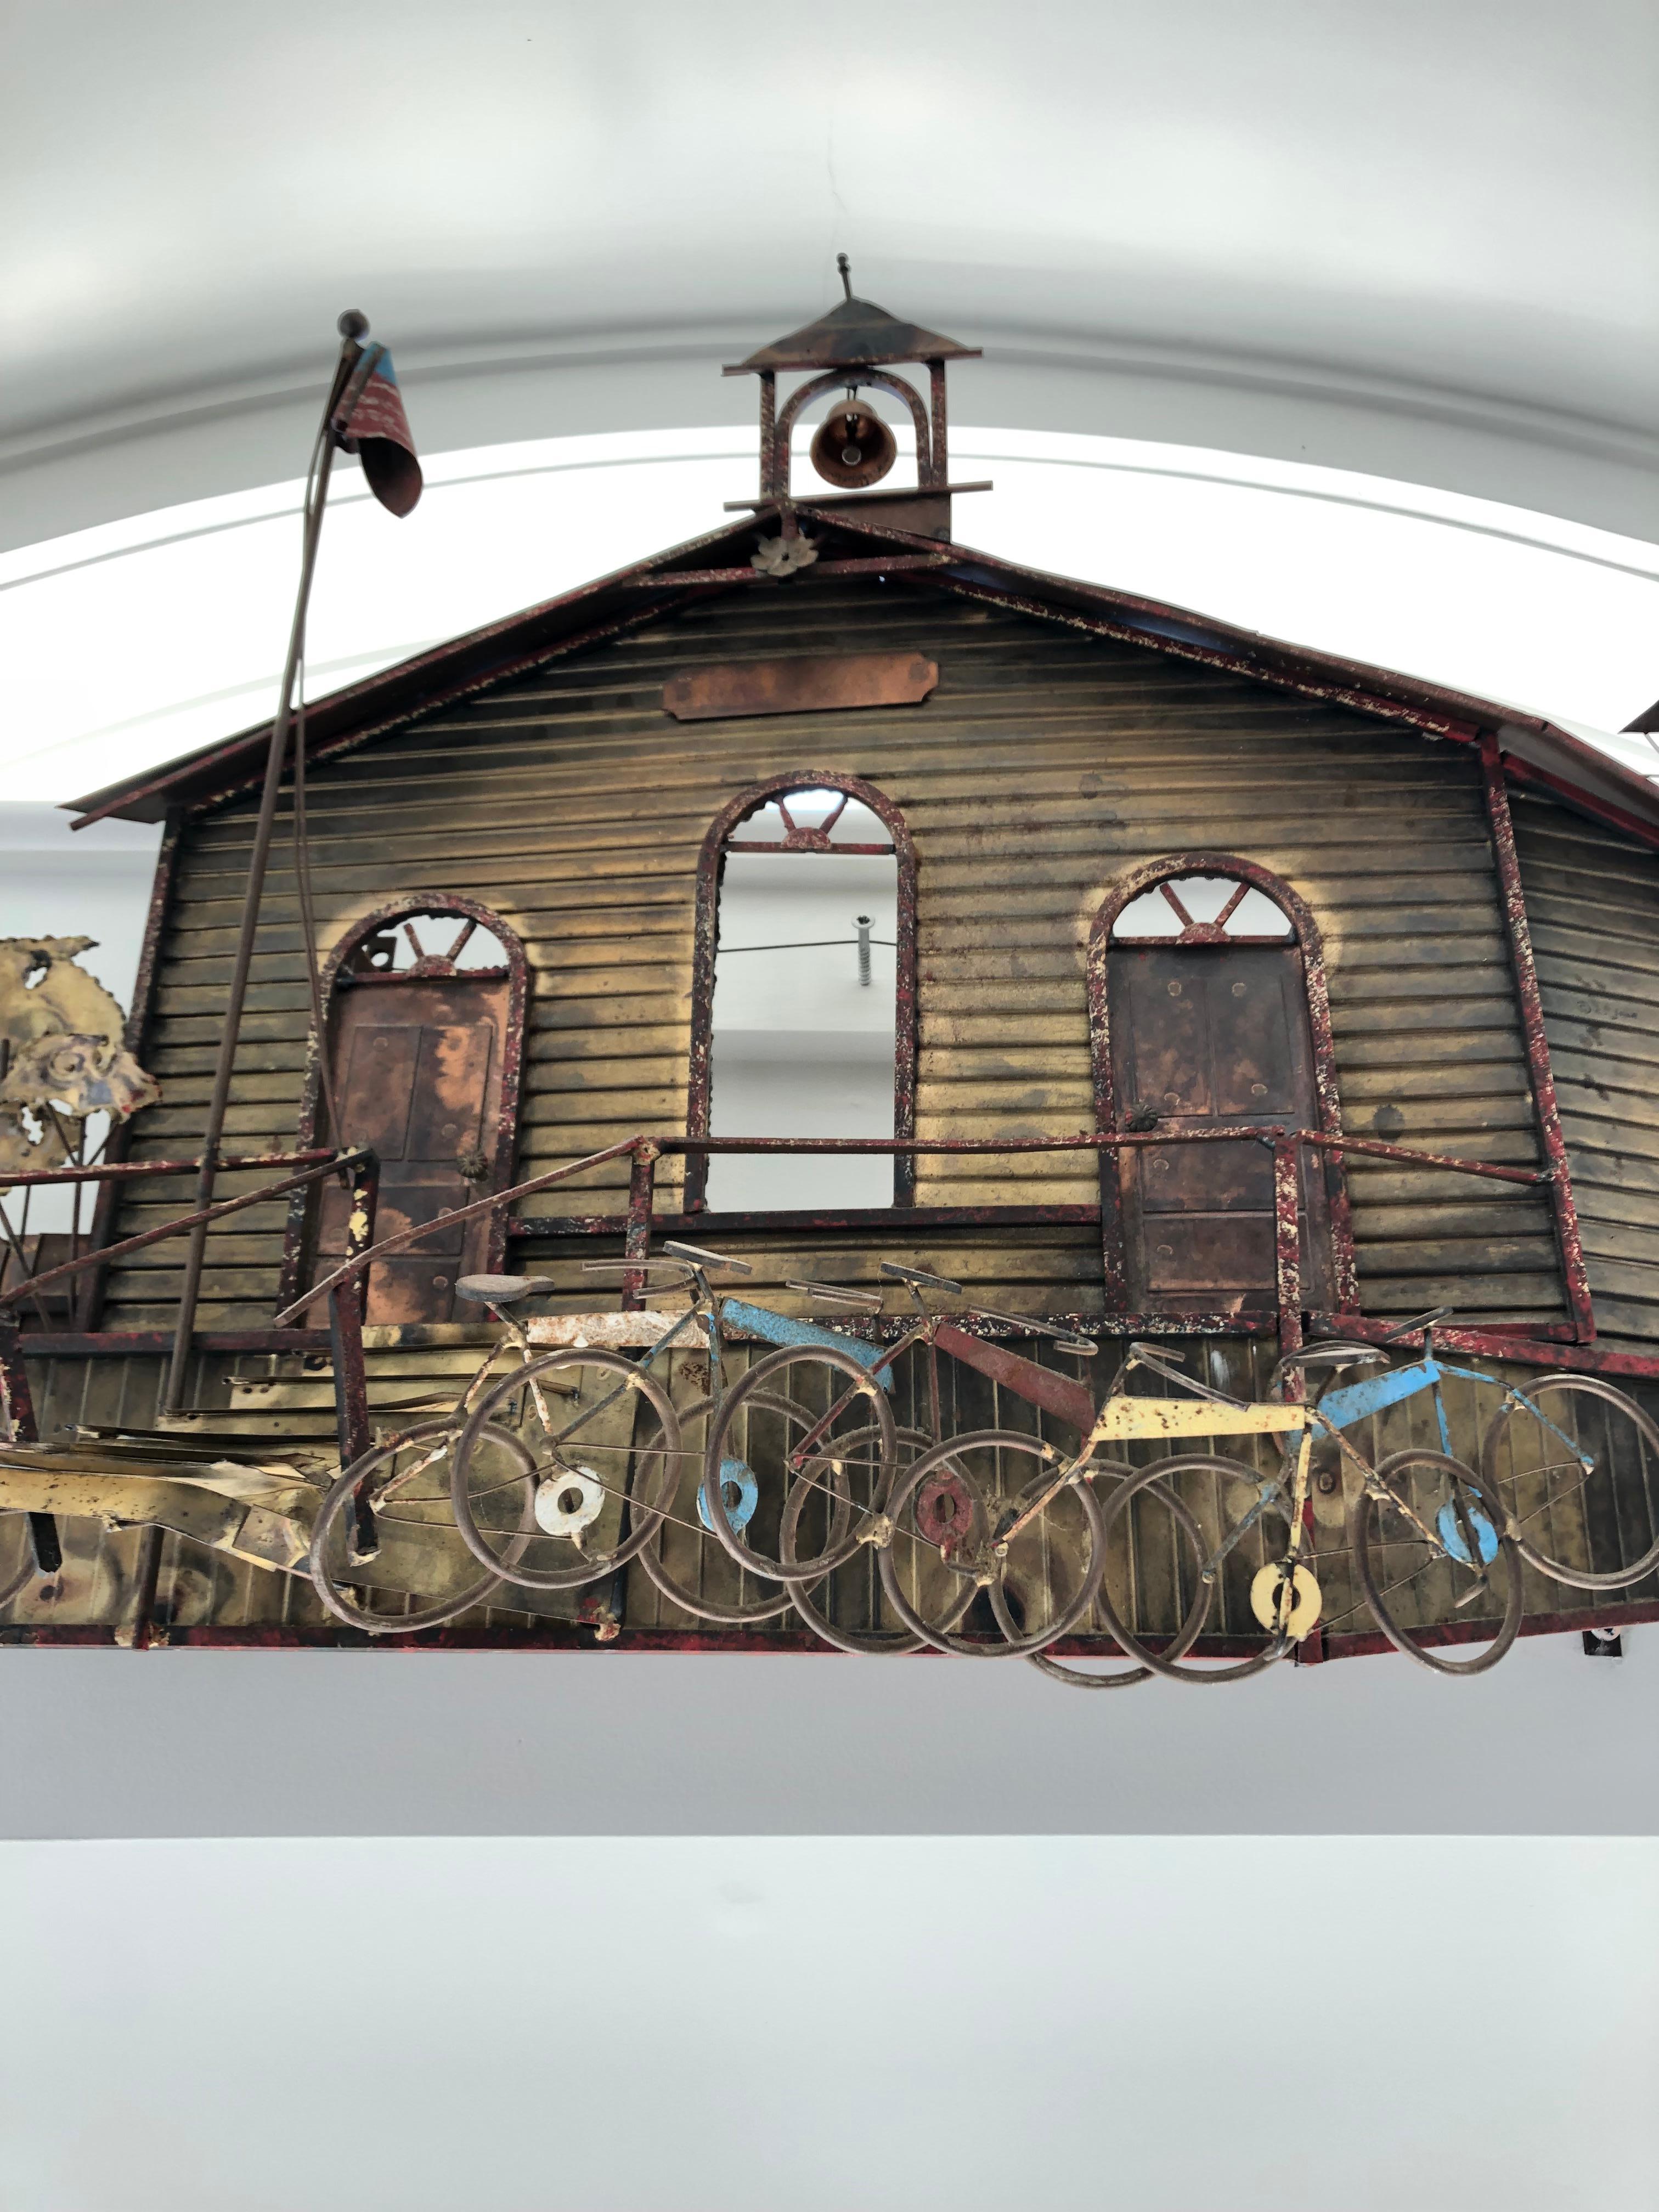 A large meticulously crafted 3 dimensional wall sculpture made of metal and brass of a school with bell tower, arched windows and door, bicycles parked in front and an American flag. The more you look, the more ingenious details are